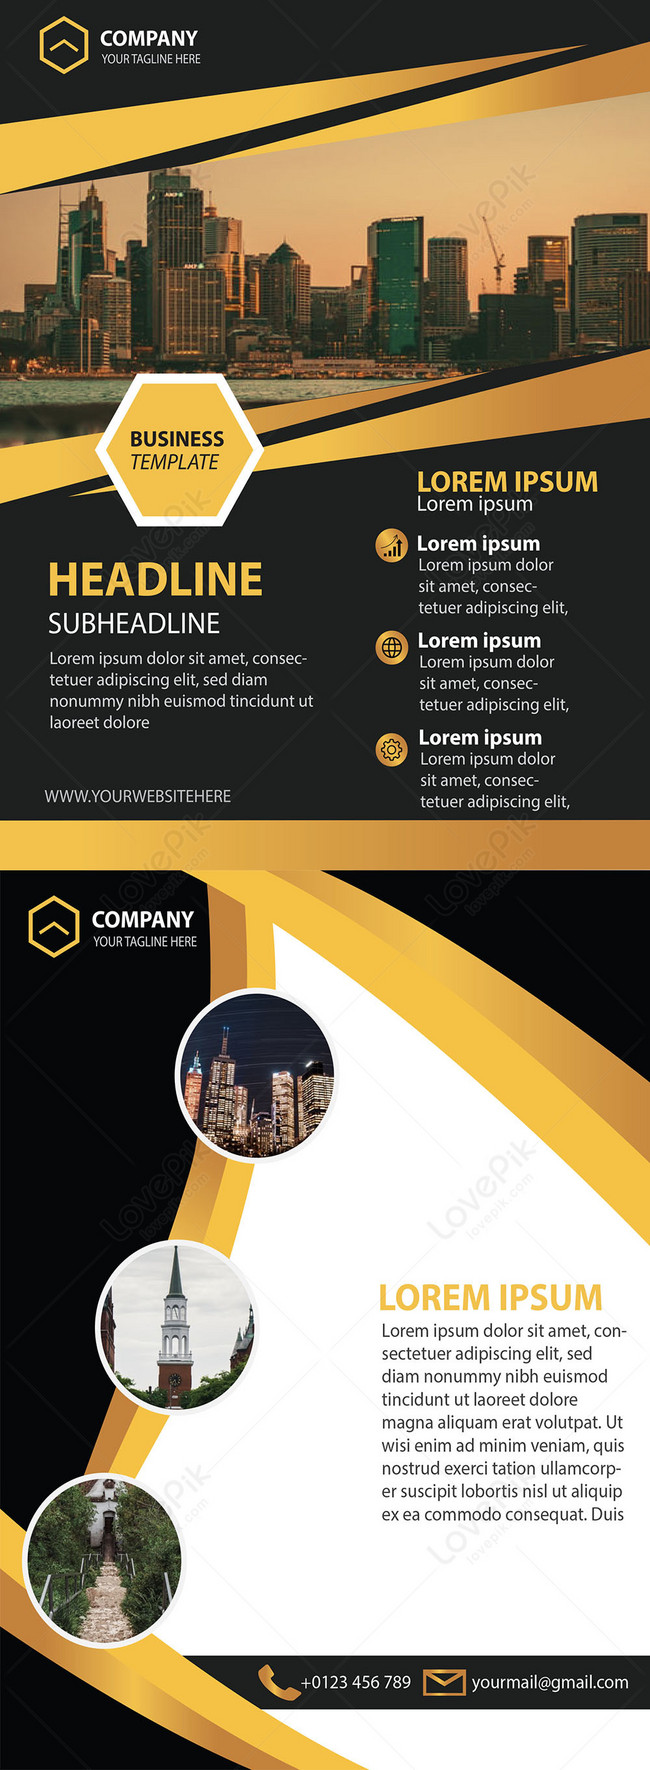 Modern black and yellow business flyer template image_picture free download  